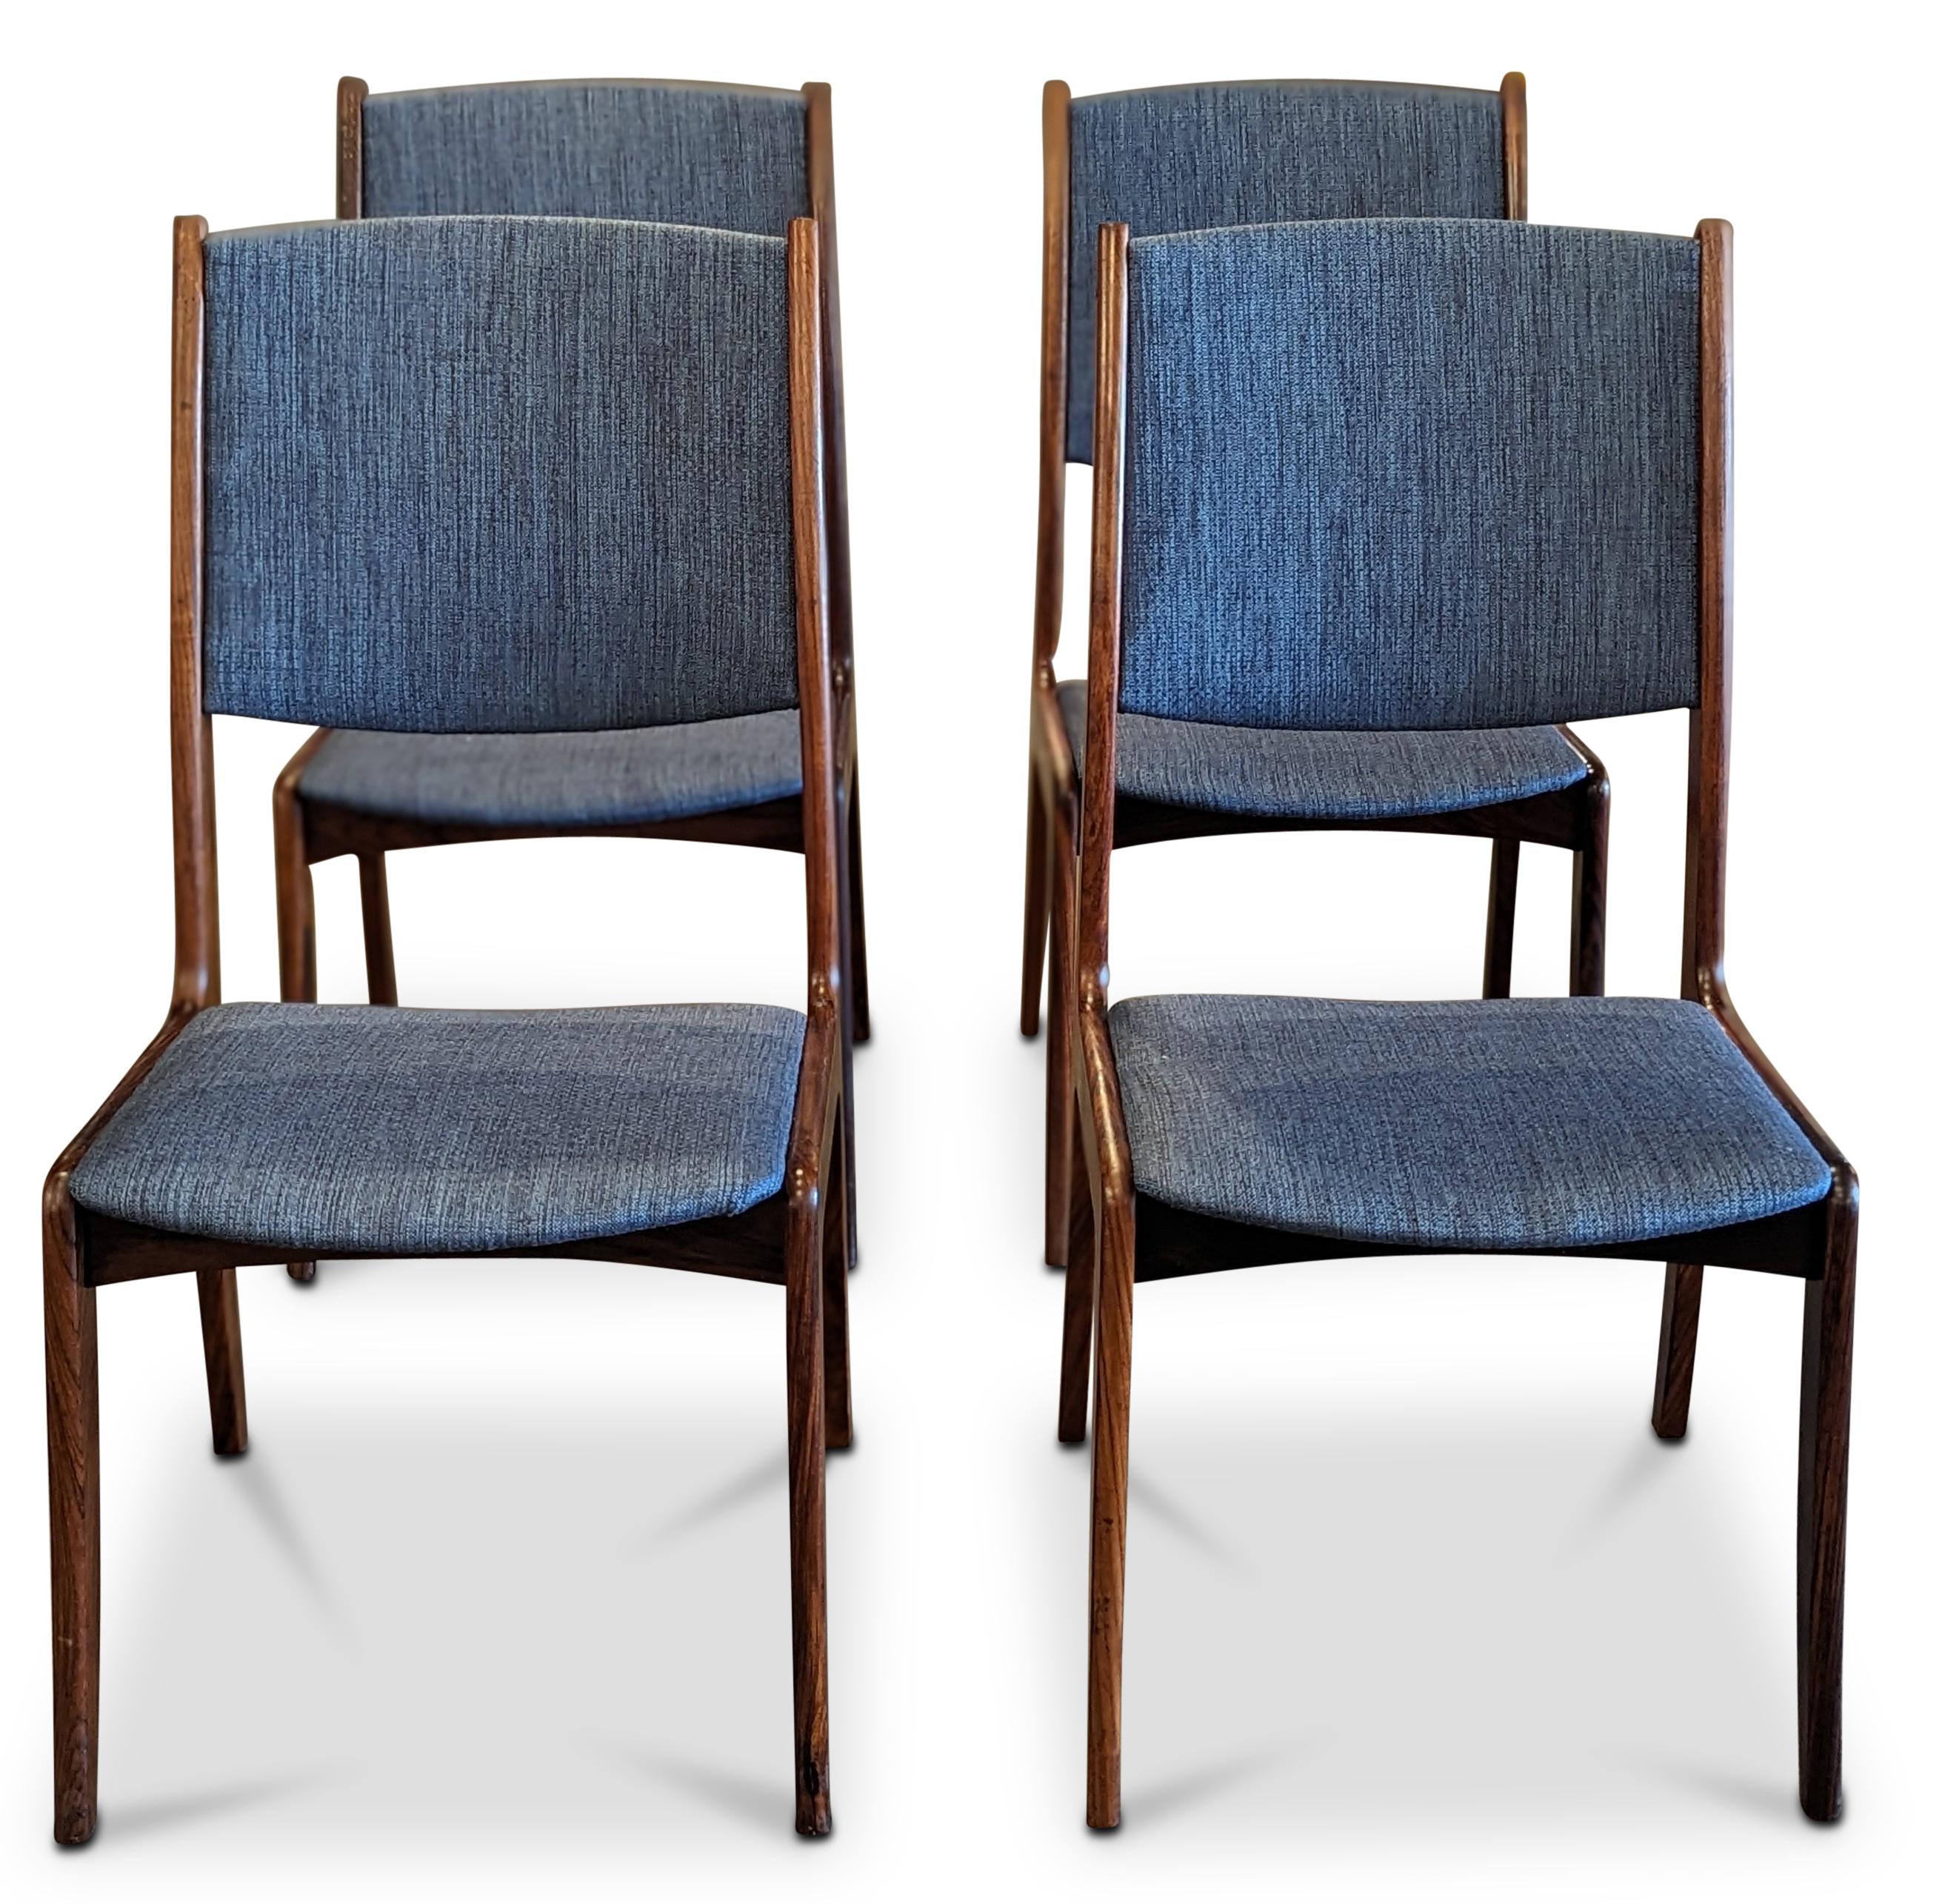 Blue fabric - New upholstery
Vintage Danish mid-century modern, made in the 1950's - Recently refurbished

The piece is more than 65+ years old and some wear and tear can be expected, but we do everything we can to refurbish them in respect to the